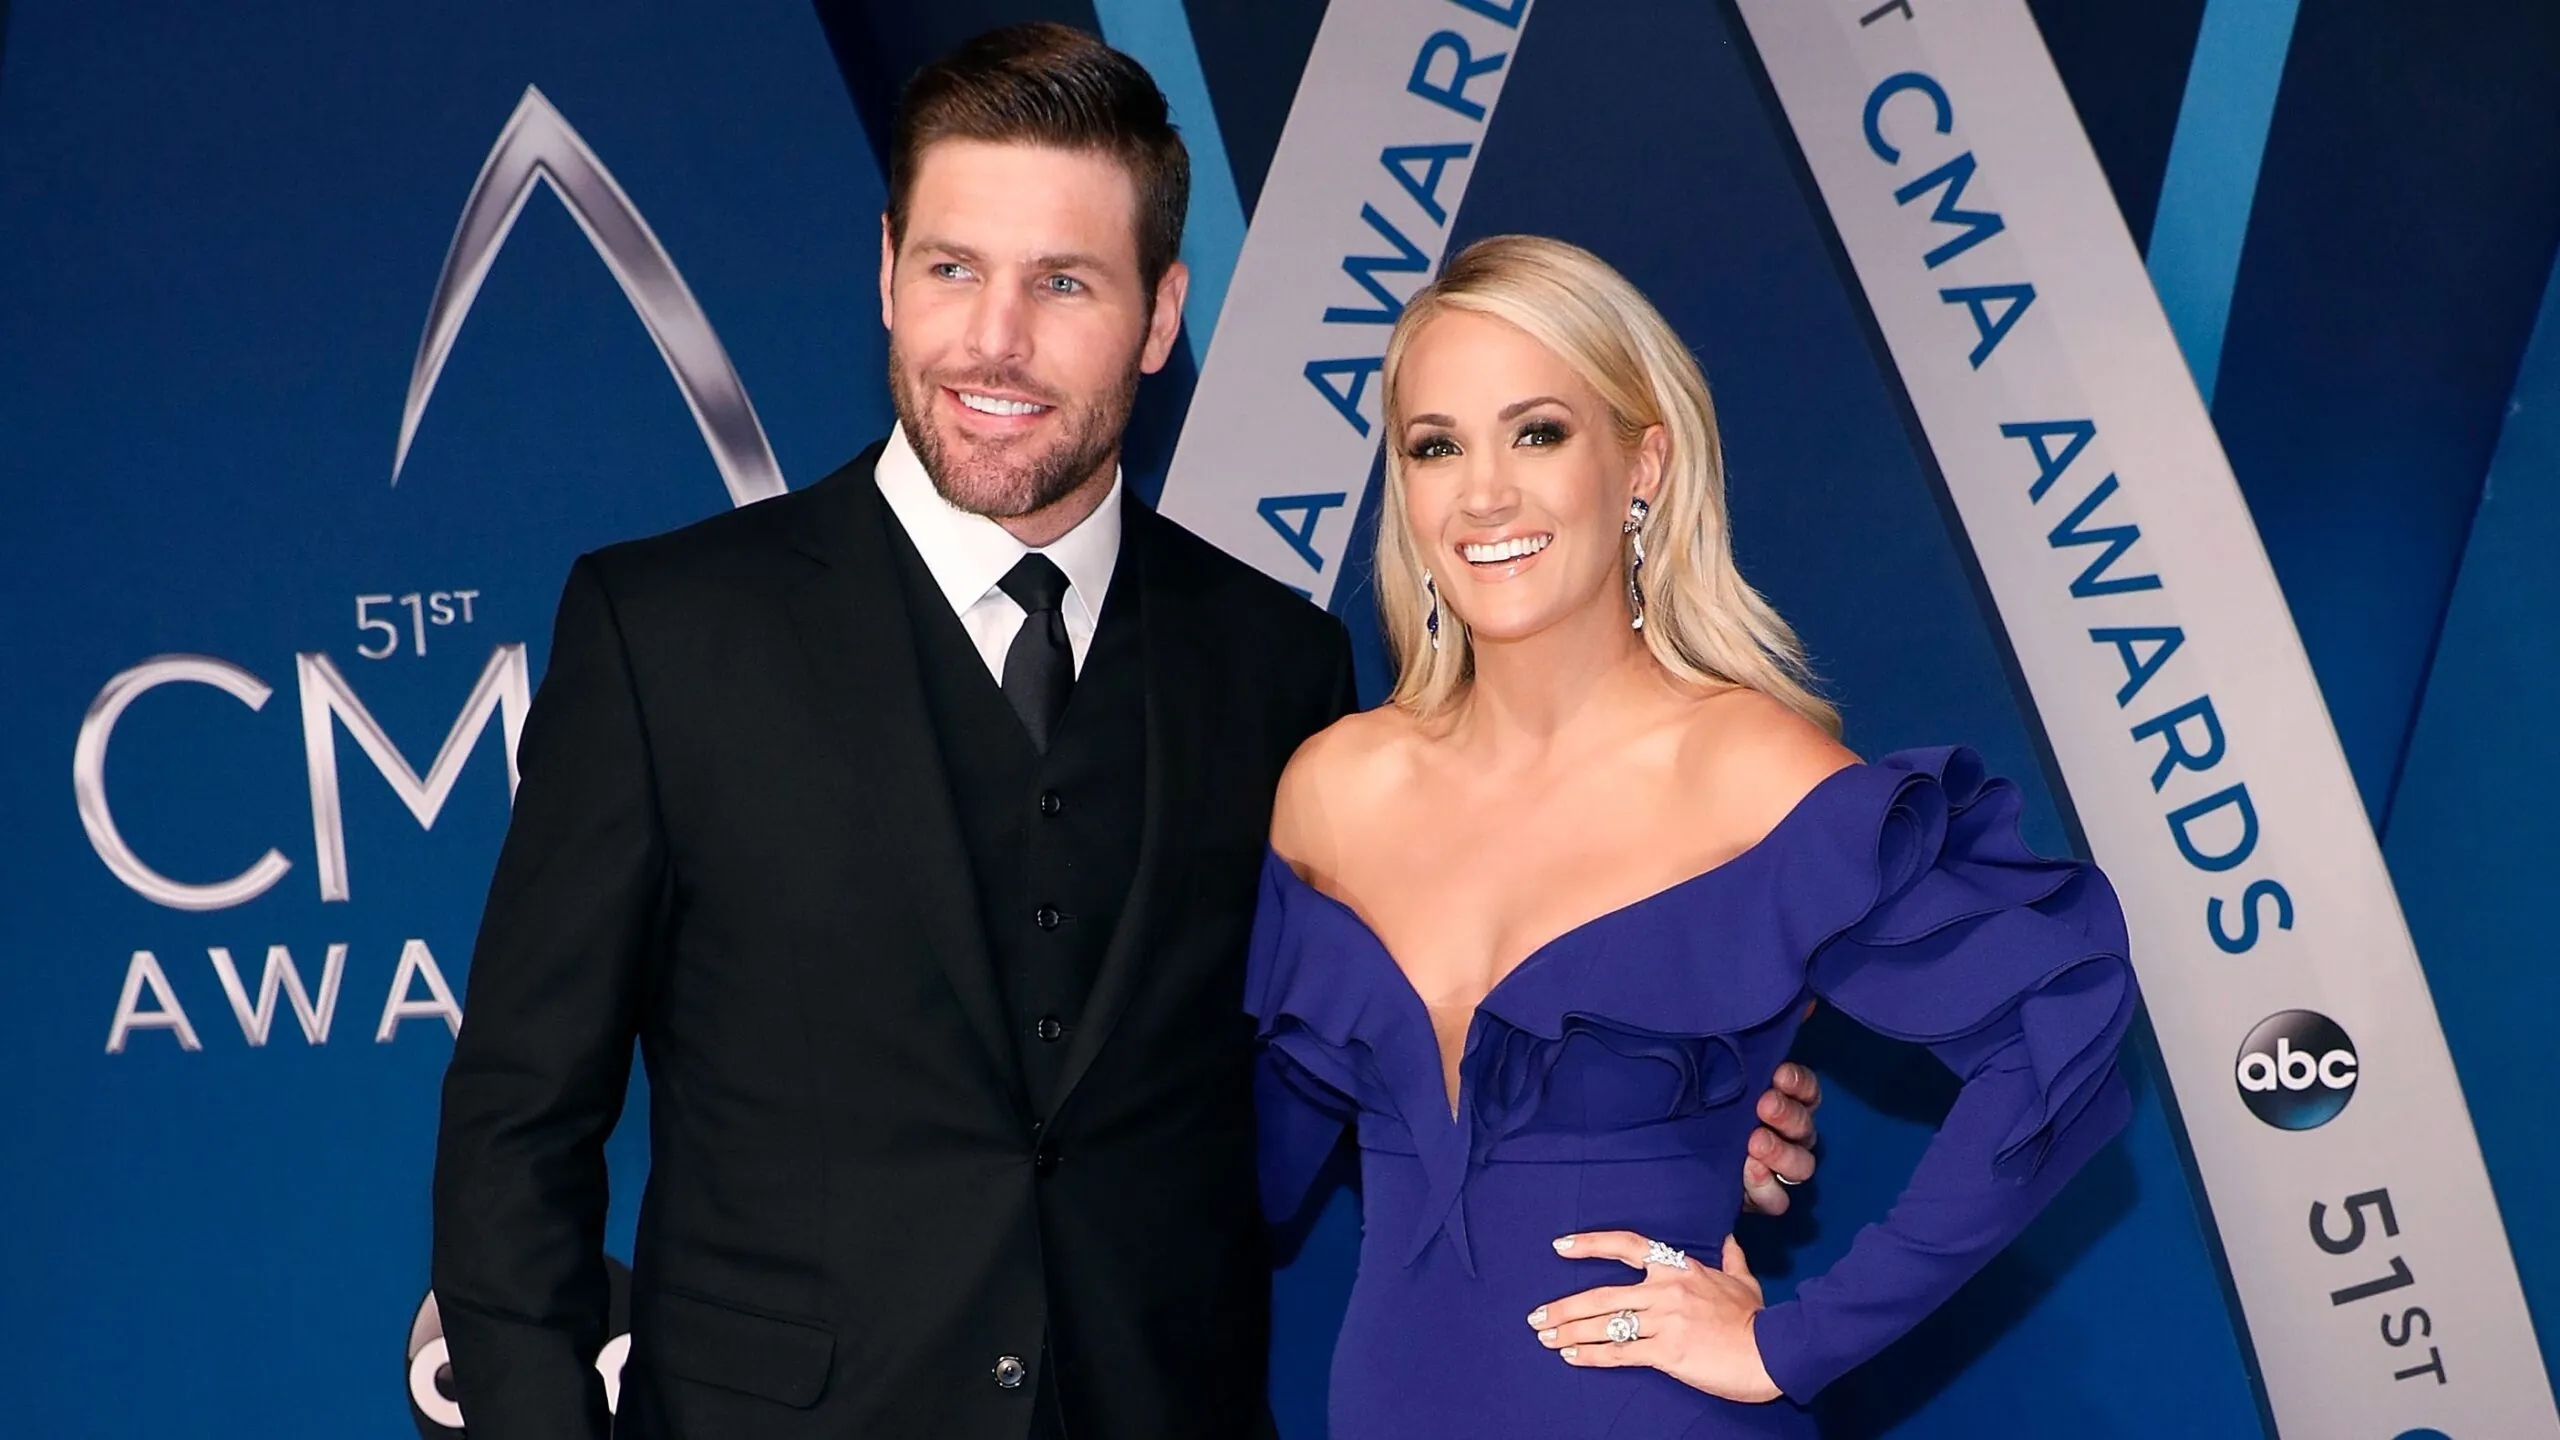 Carrie Underwood's husband Mike Fisher